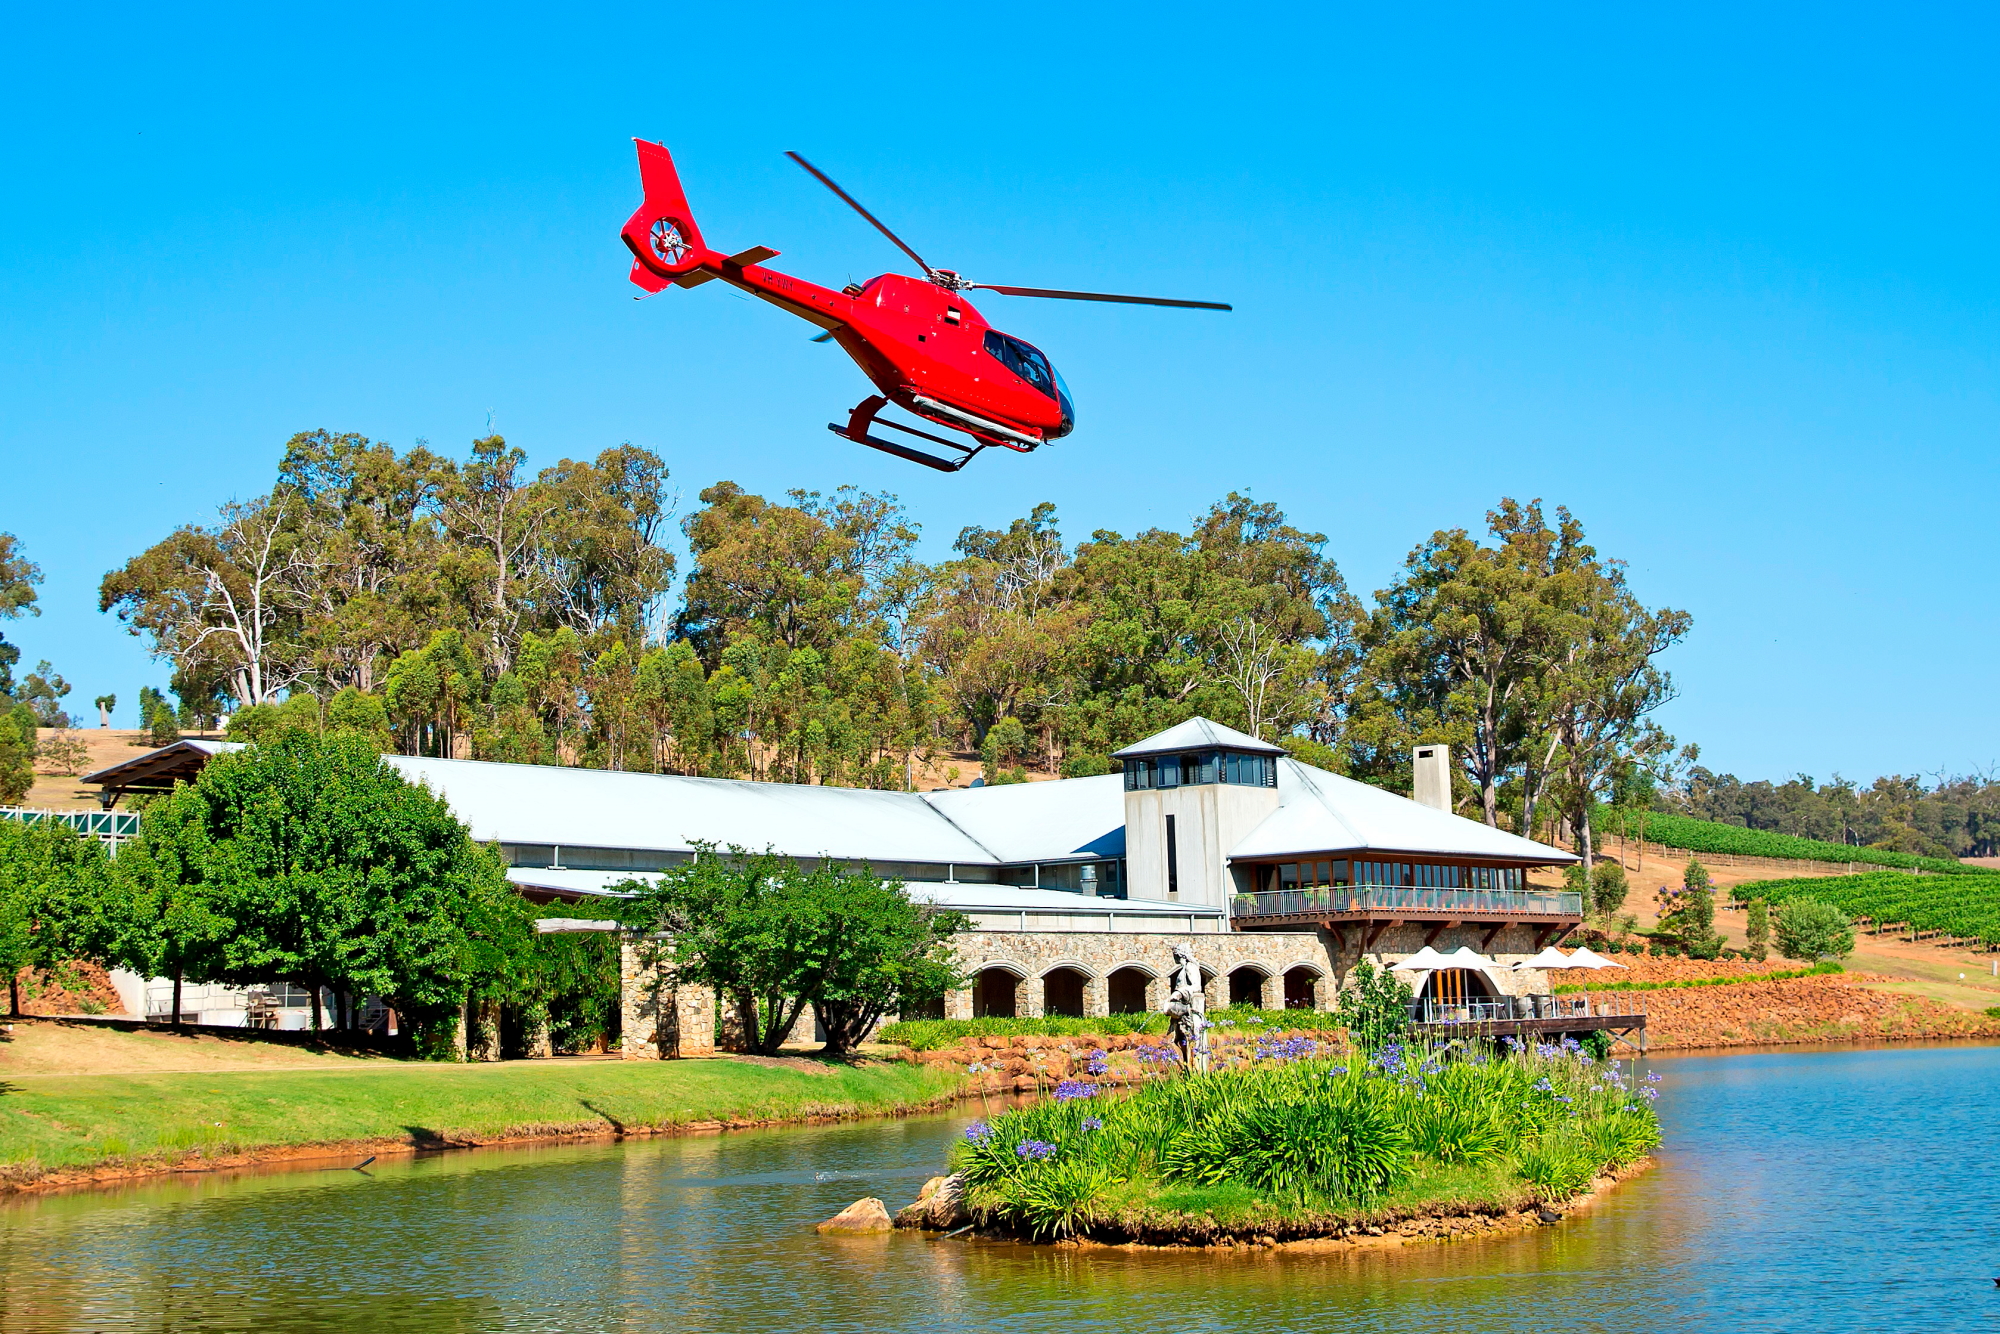 Como The Treasury, in partnership with Millbrook Winery, has launched a helicopter service for those visitors to Perth who would like to experience Western Australia's famous food and wine, but don’t have time to make the six-hour drive to the Margaret River wine region. Click to enlarge.